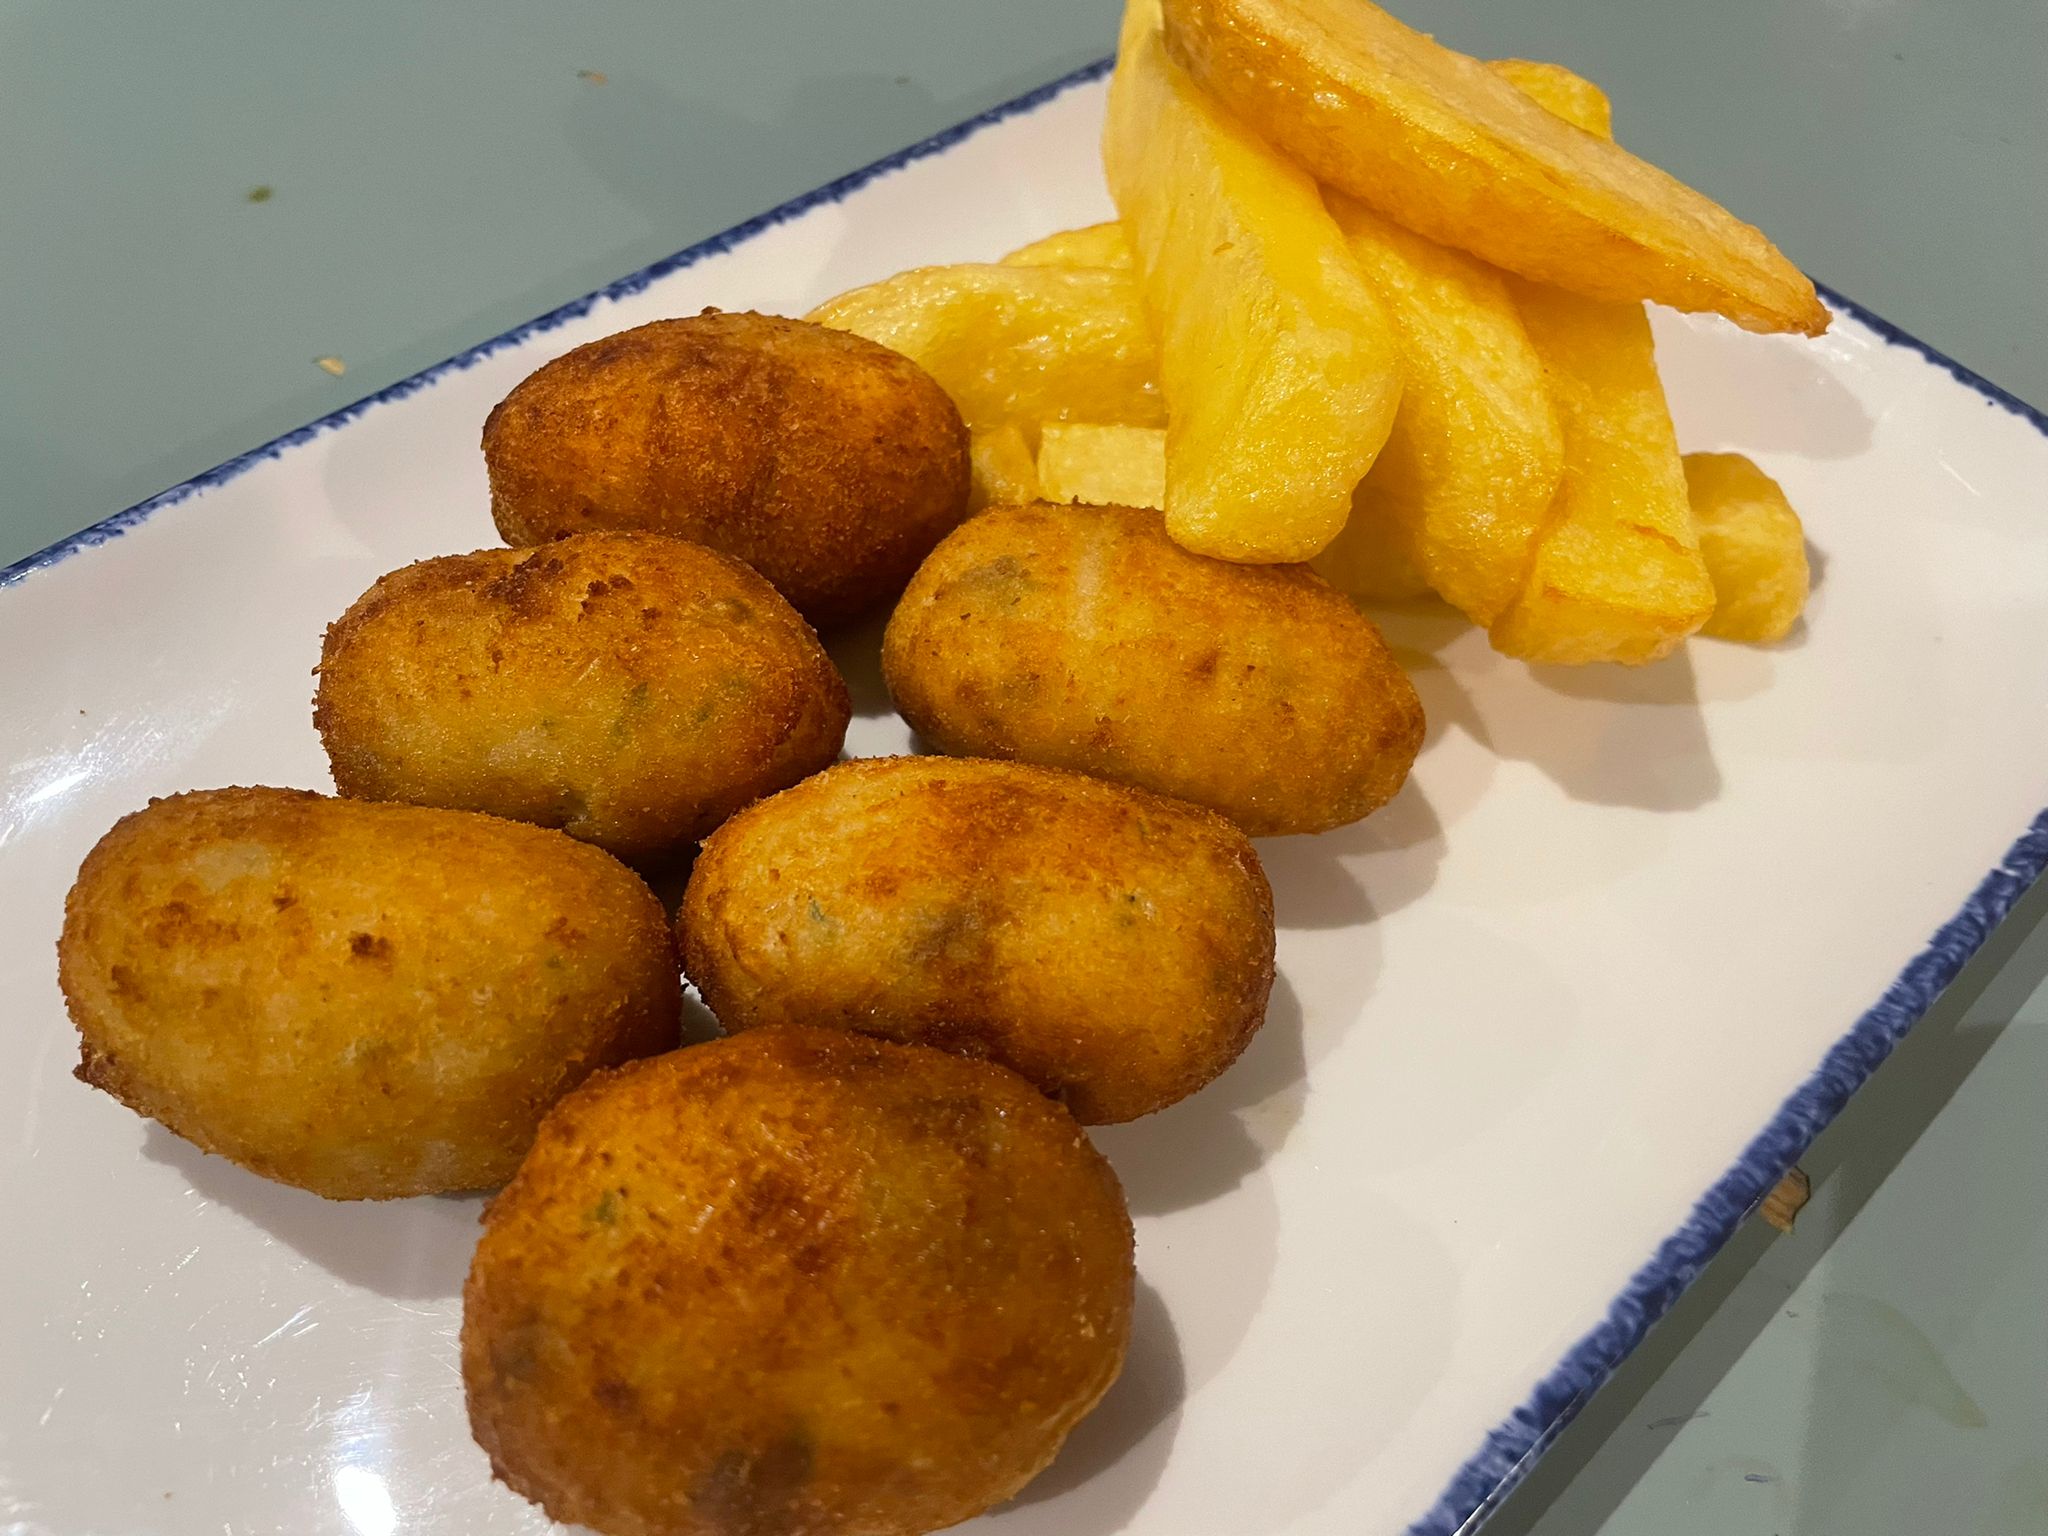 Croquettes (6 units) with French fries